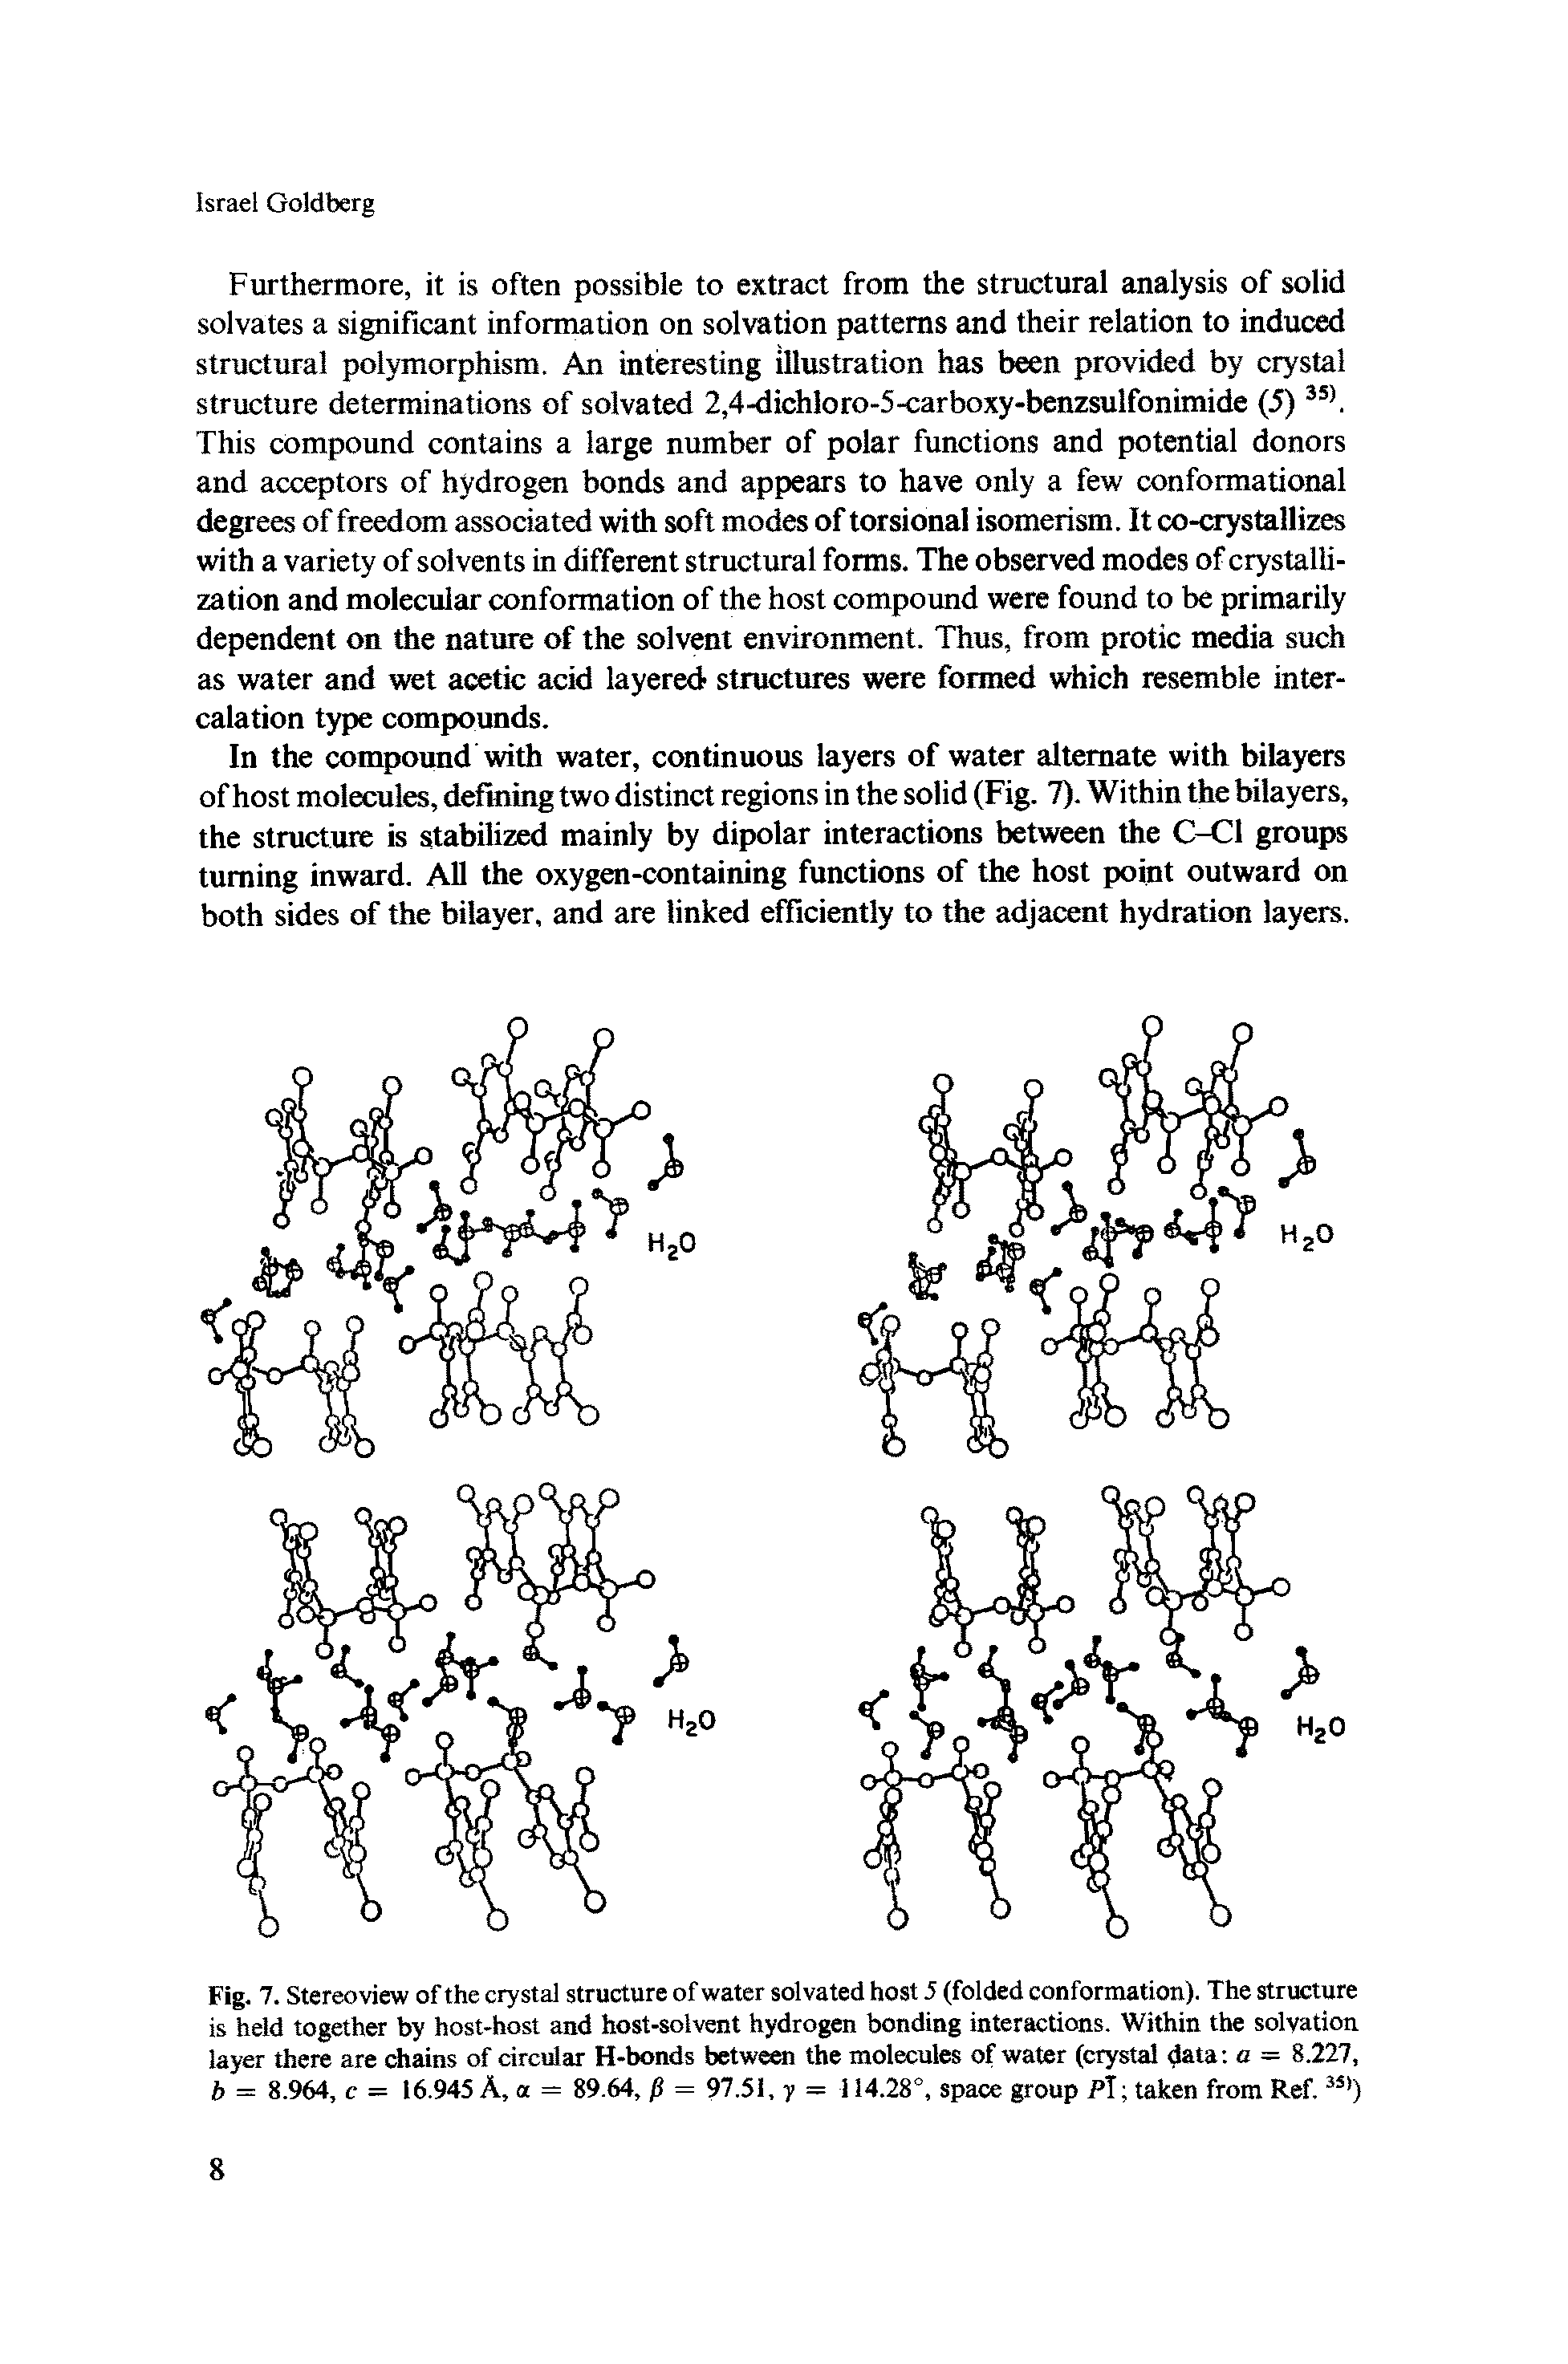 Fig. 7. Stereoview of the crystal structure of water solvated host 5 (folded conformation). The structure is held together by host-host and host-solvent hydrogen bonding interactions. Within the solvation layer there are chains of circular H-bonds between the molecules of water (crystal data a - 8.227, b = 8.964, c - 16.945 A, a = 89.64, / = 97.51, y = 114.28°, space group Pi taken from Ref,3S>)...